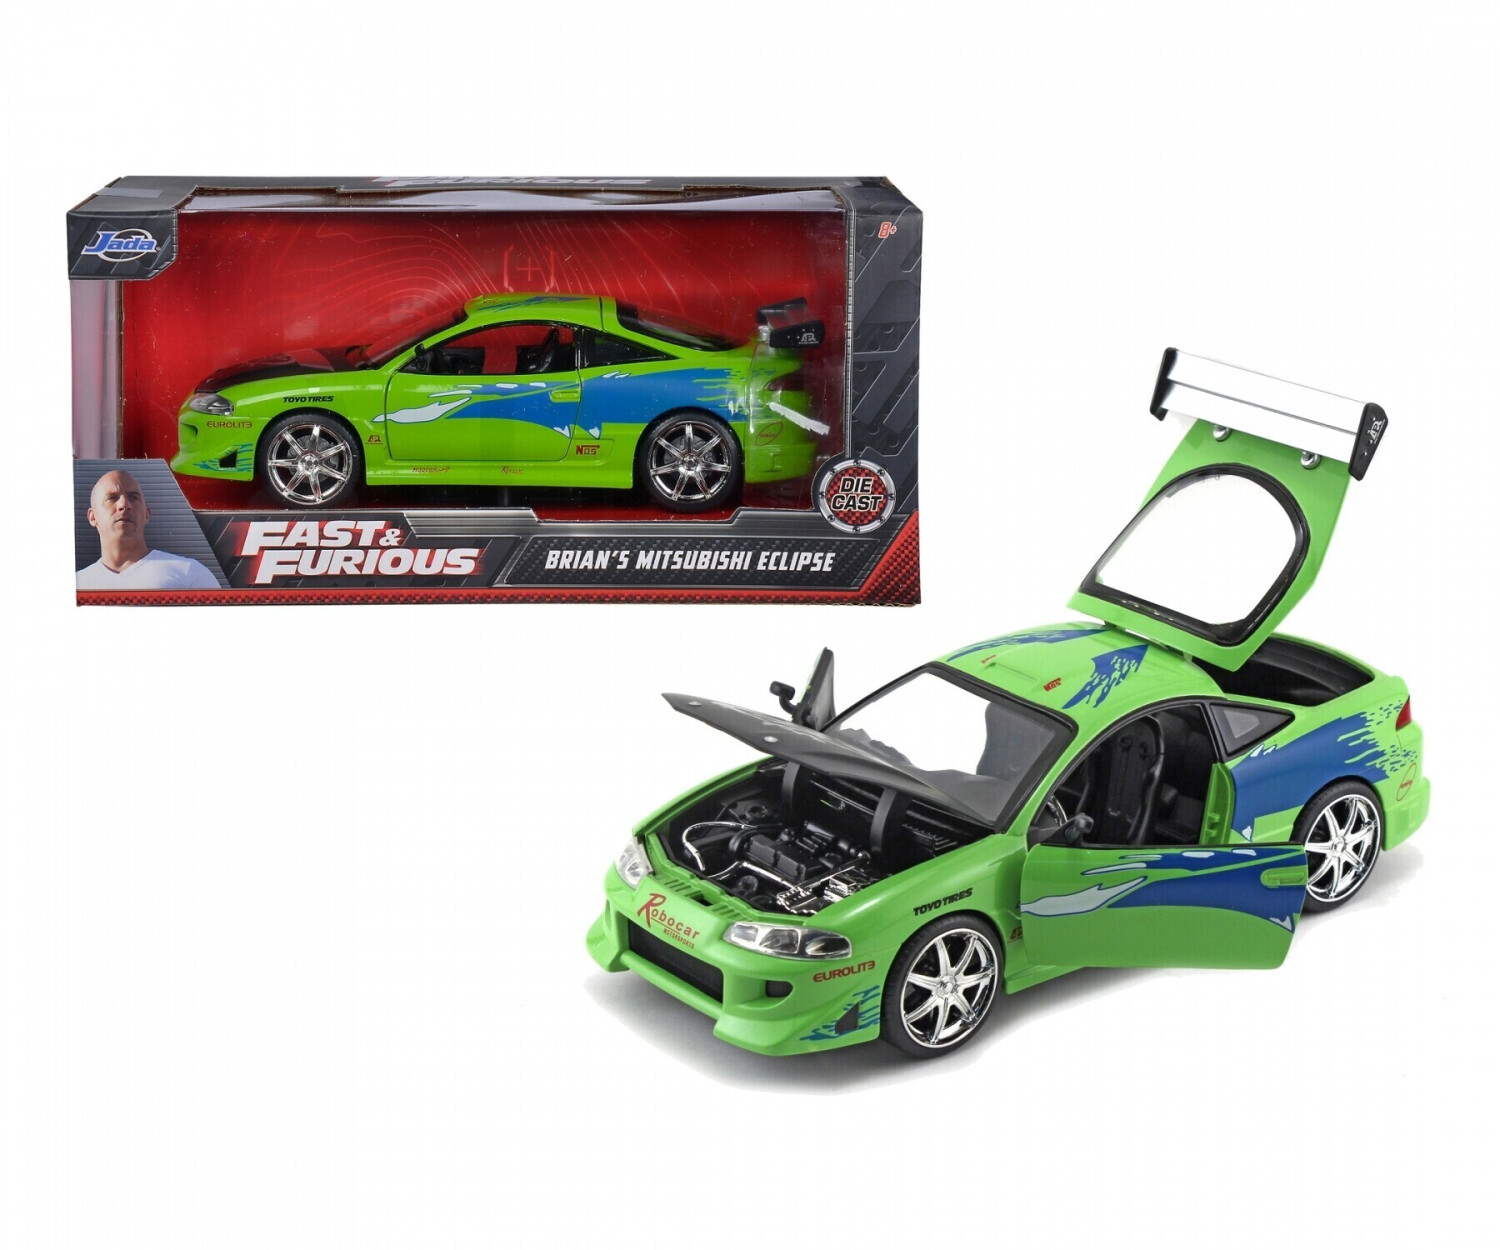 Voiture miniature fast and furious - Cdiscount